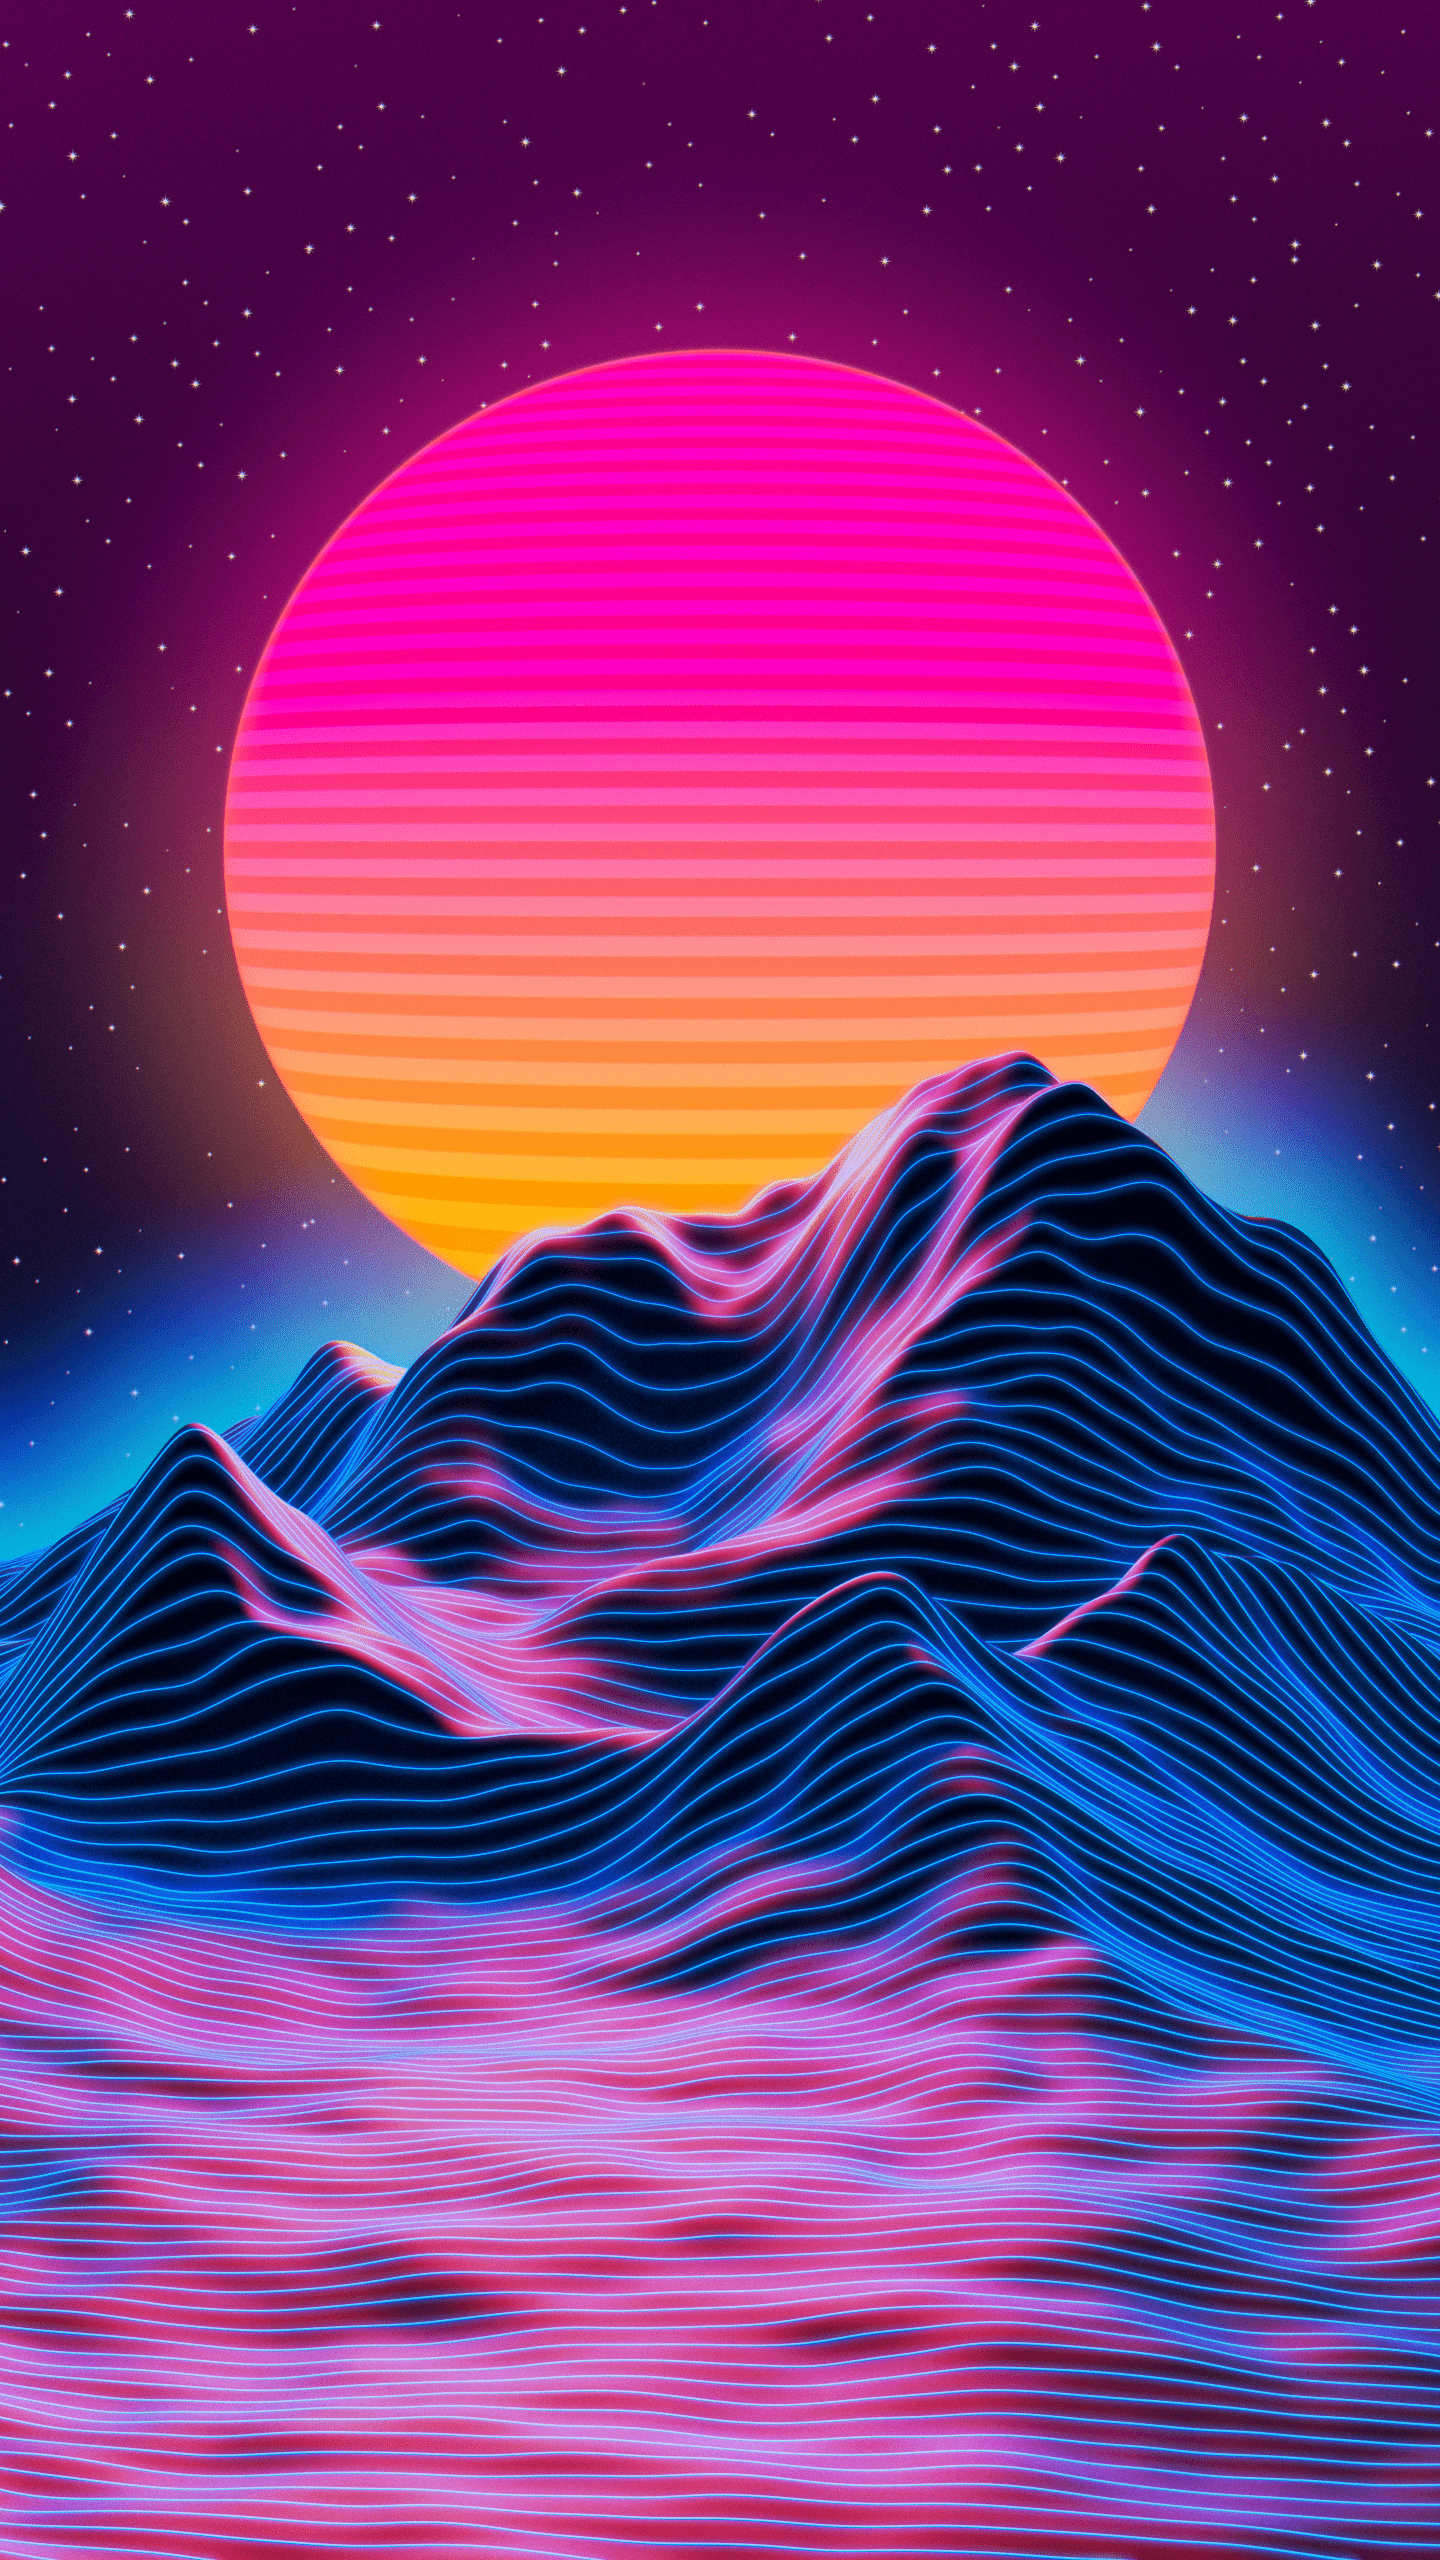 Retro Sunset Wallpapers - Top Free Retro Sunset Backgrounds